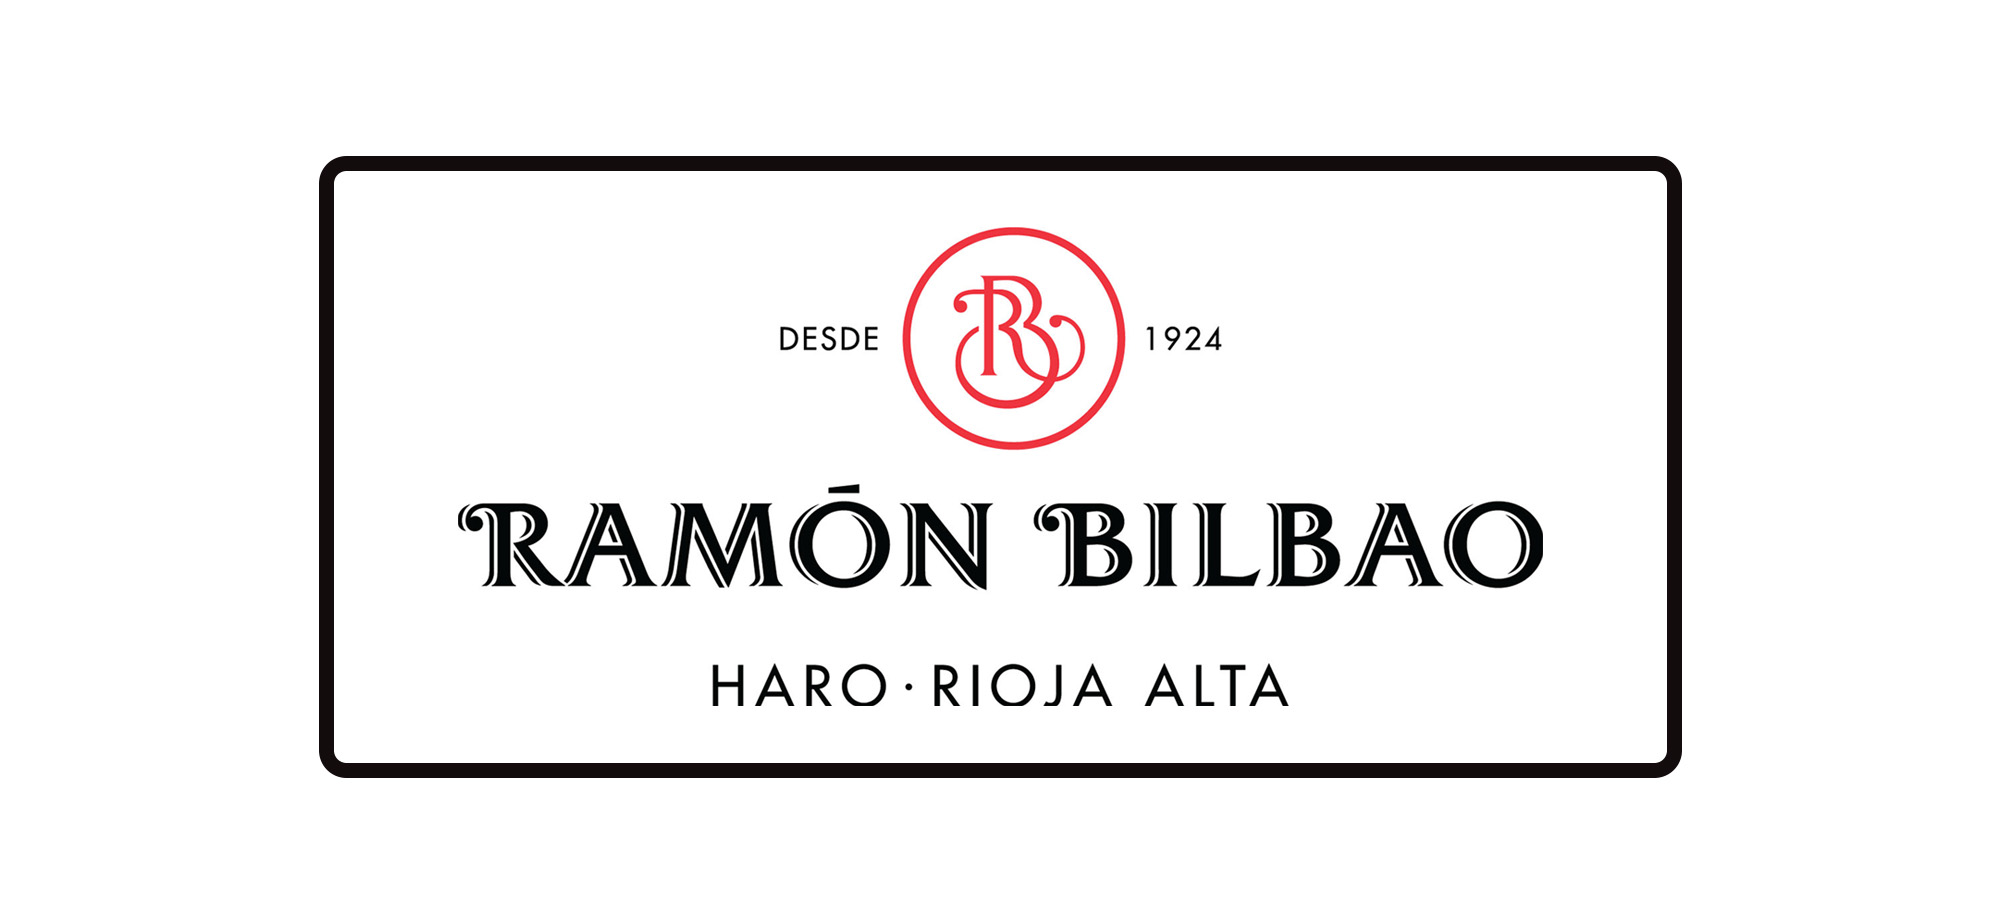 Bodegas Ramón Bilbao Teams up with The Peñín Guide for a Spanish Wine Academy Seminar at City Winery in NYC.